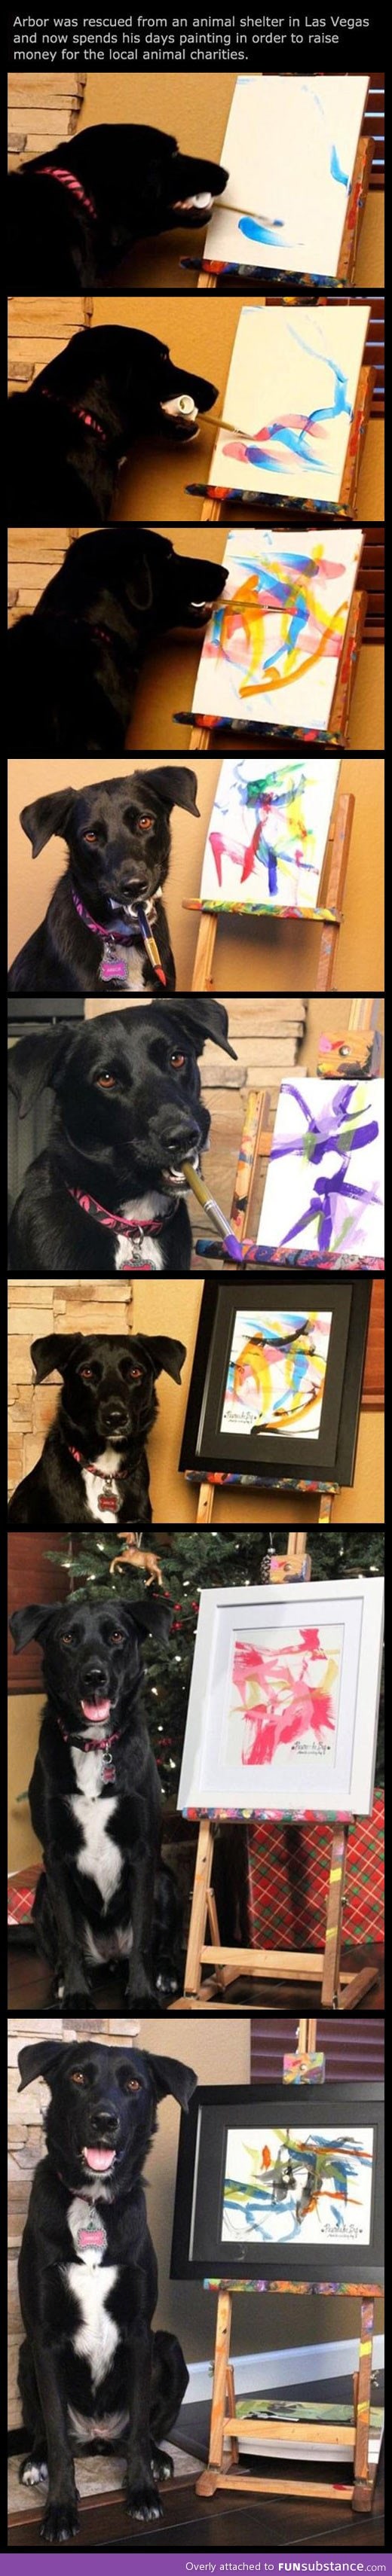 The dog who can paint